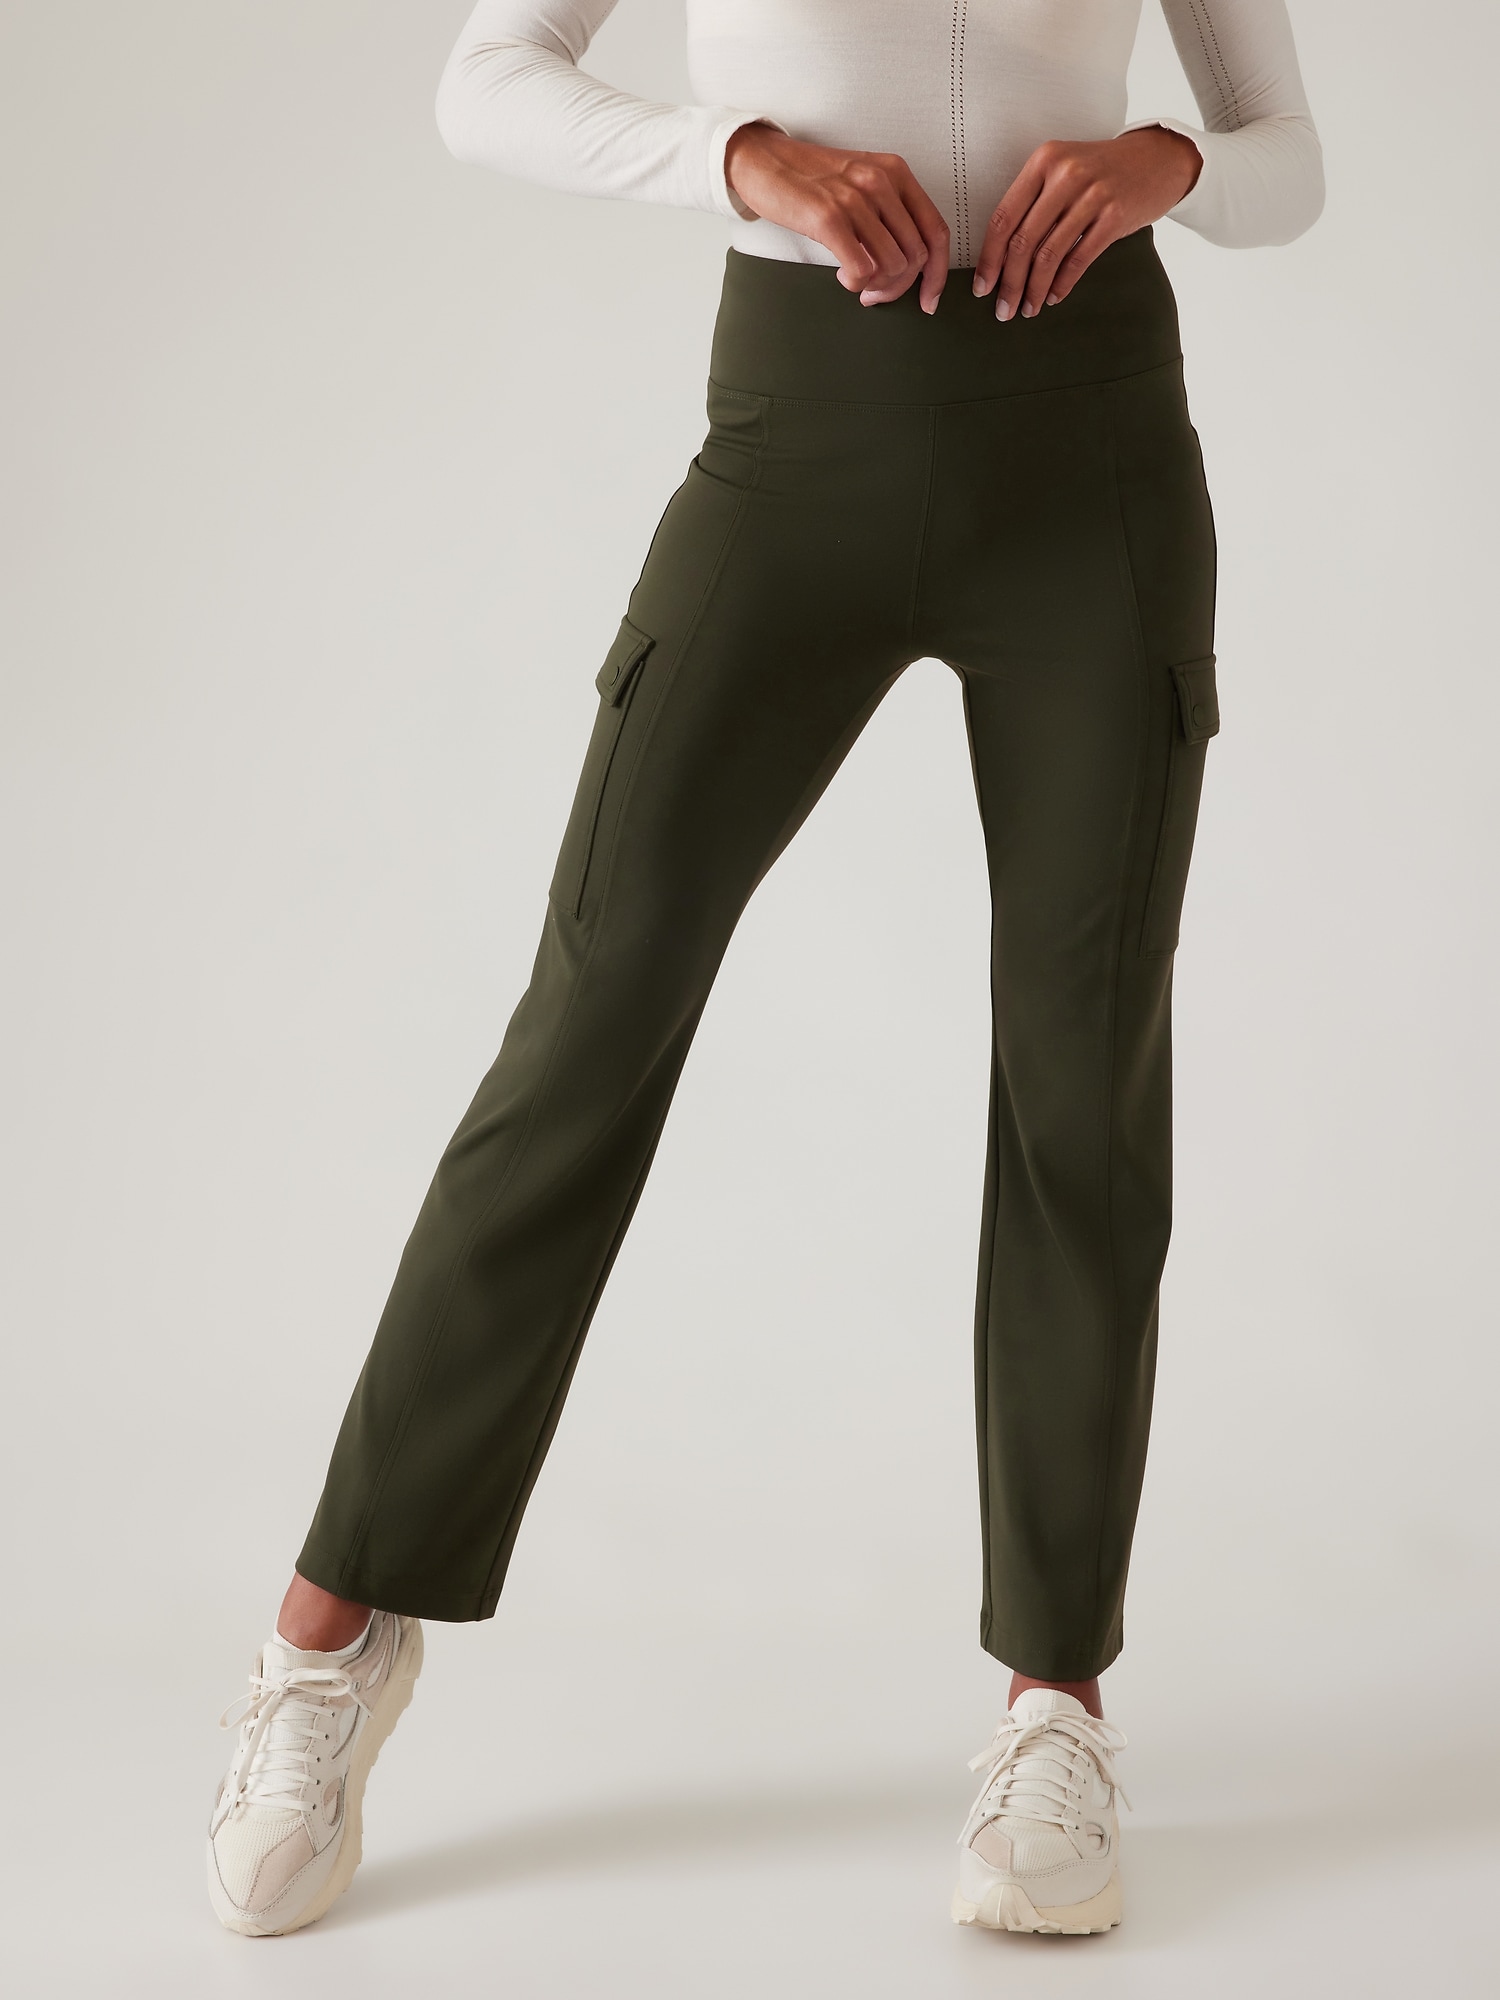 Athleta Size M Tall Pants for Women for sale